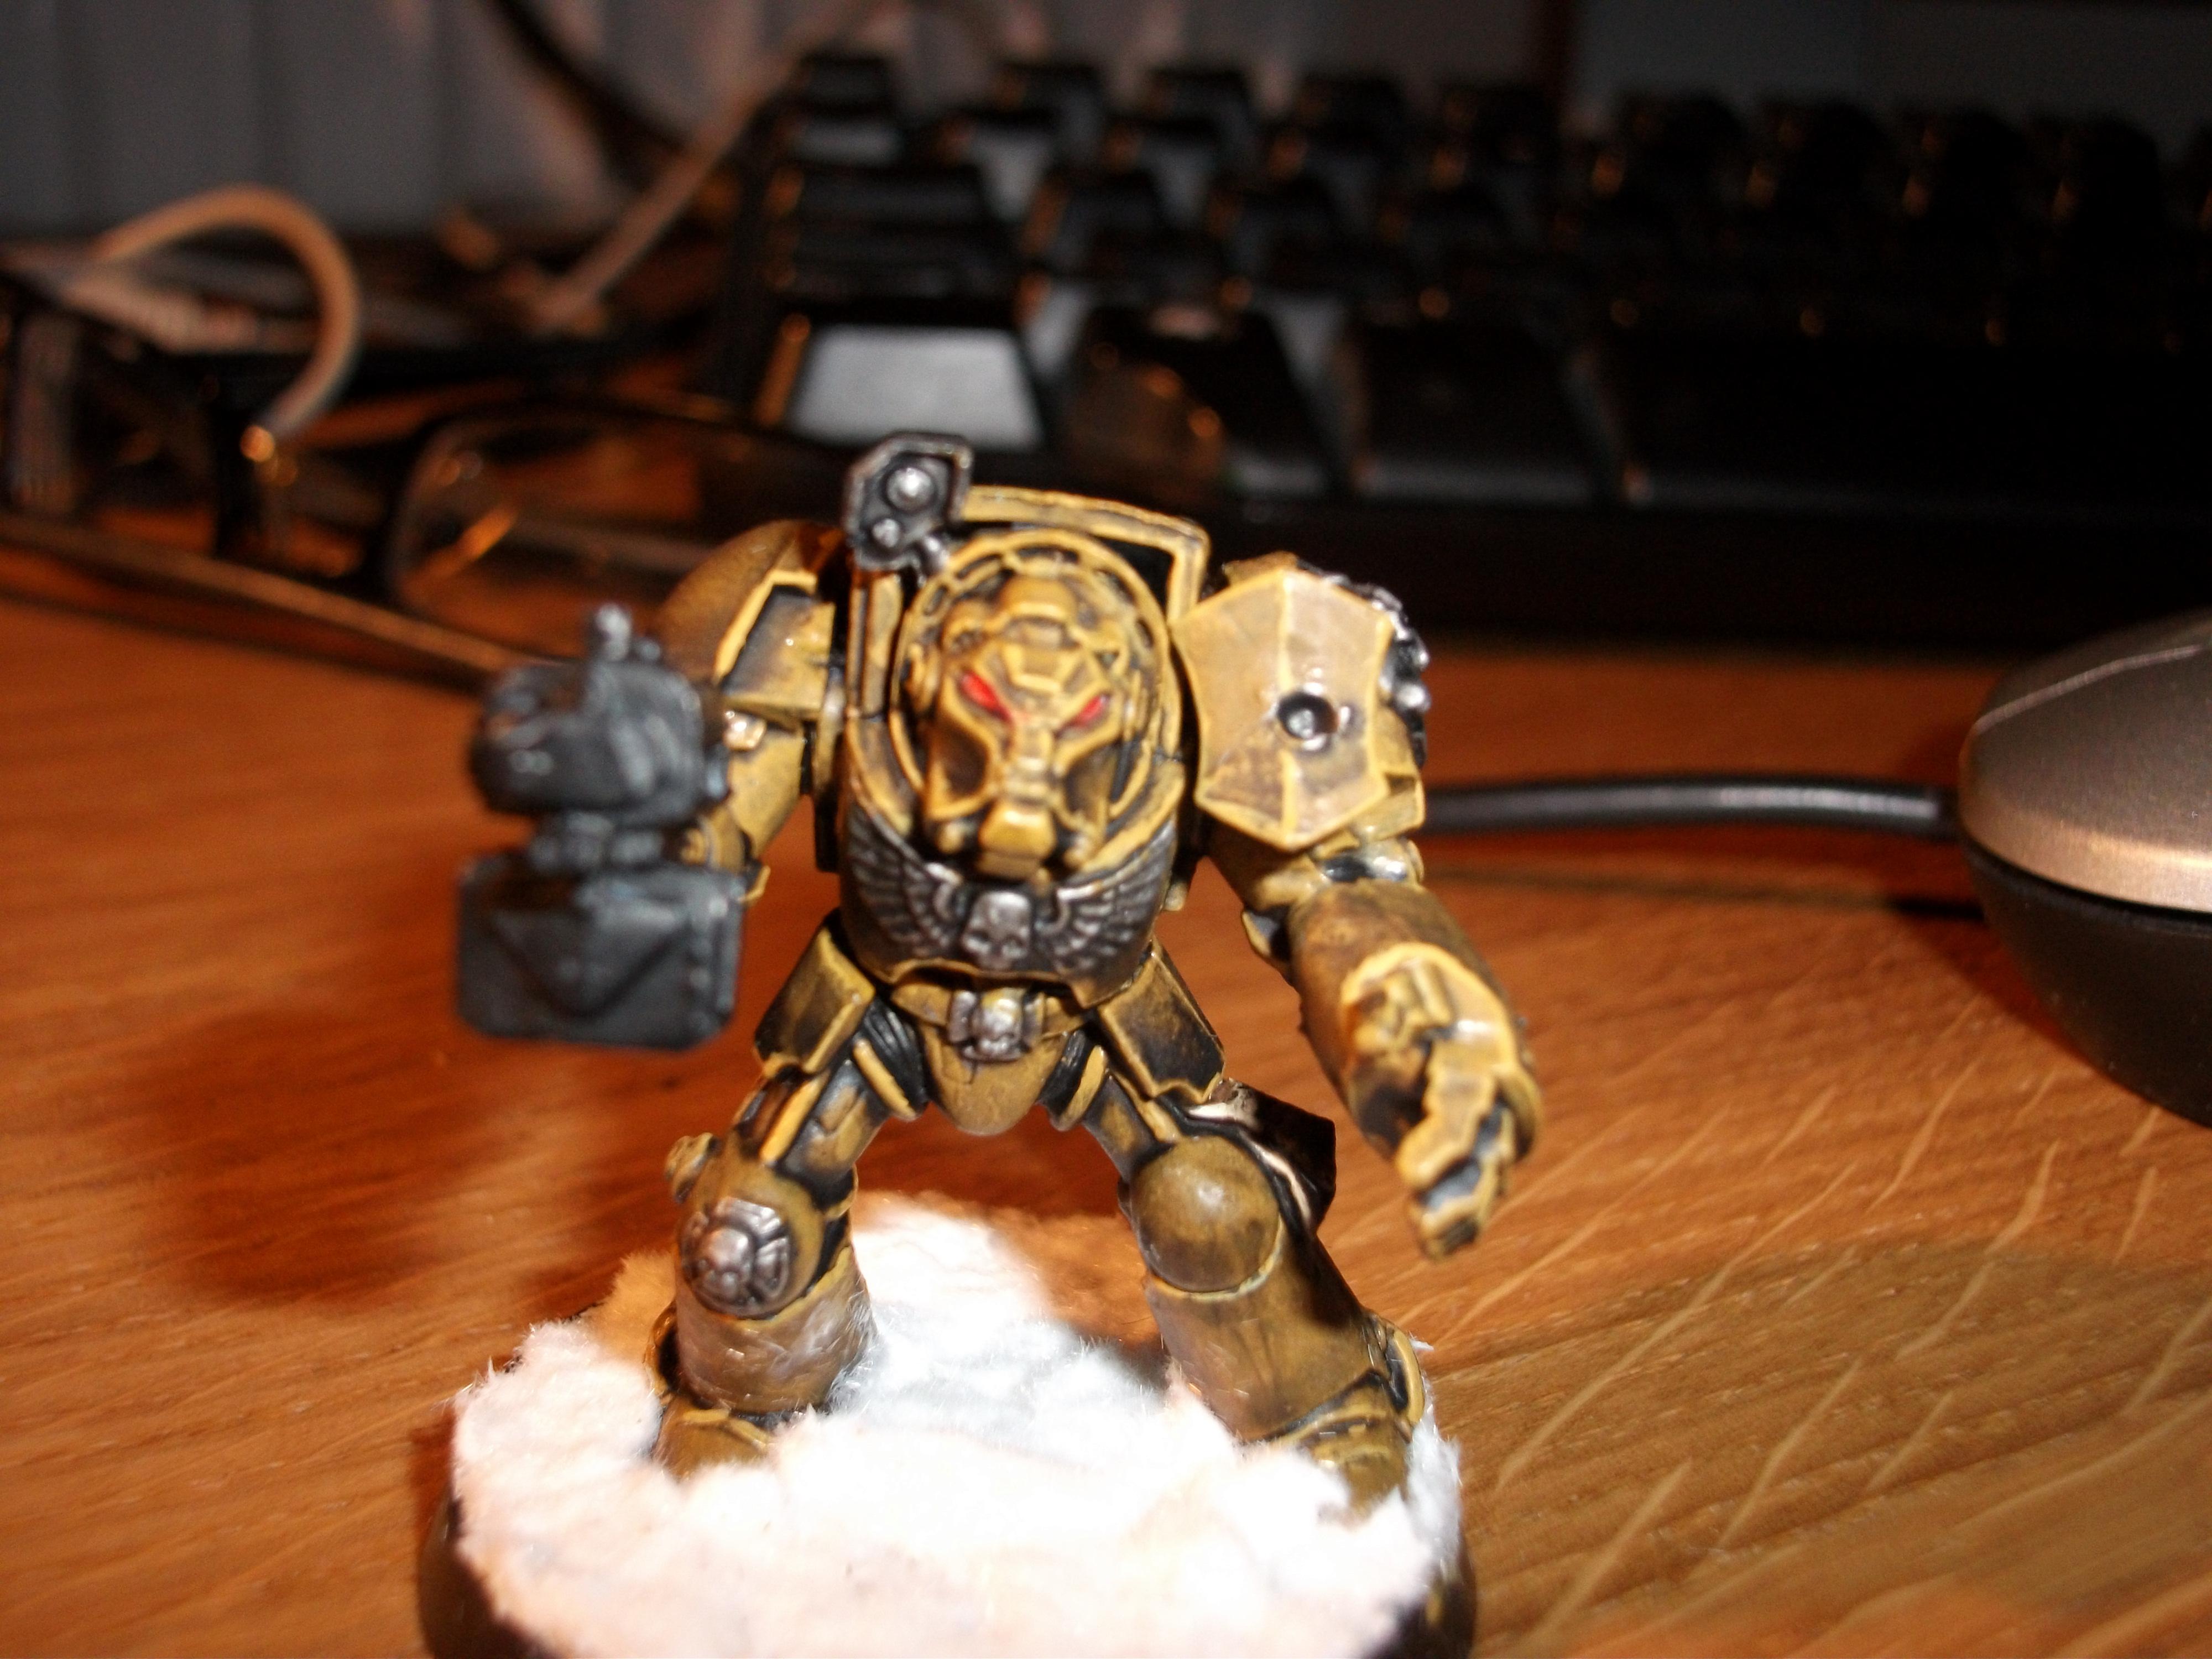 Imperial Fists, Terminator Armor, Warhammer 40,000